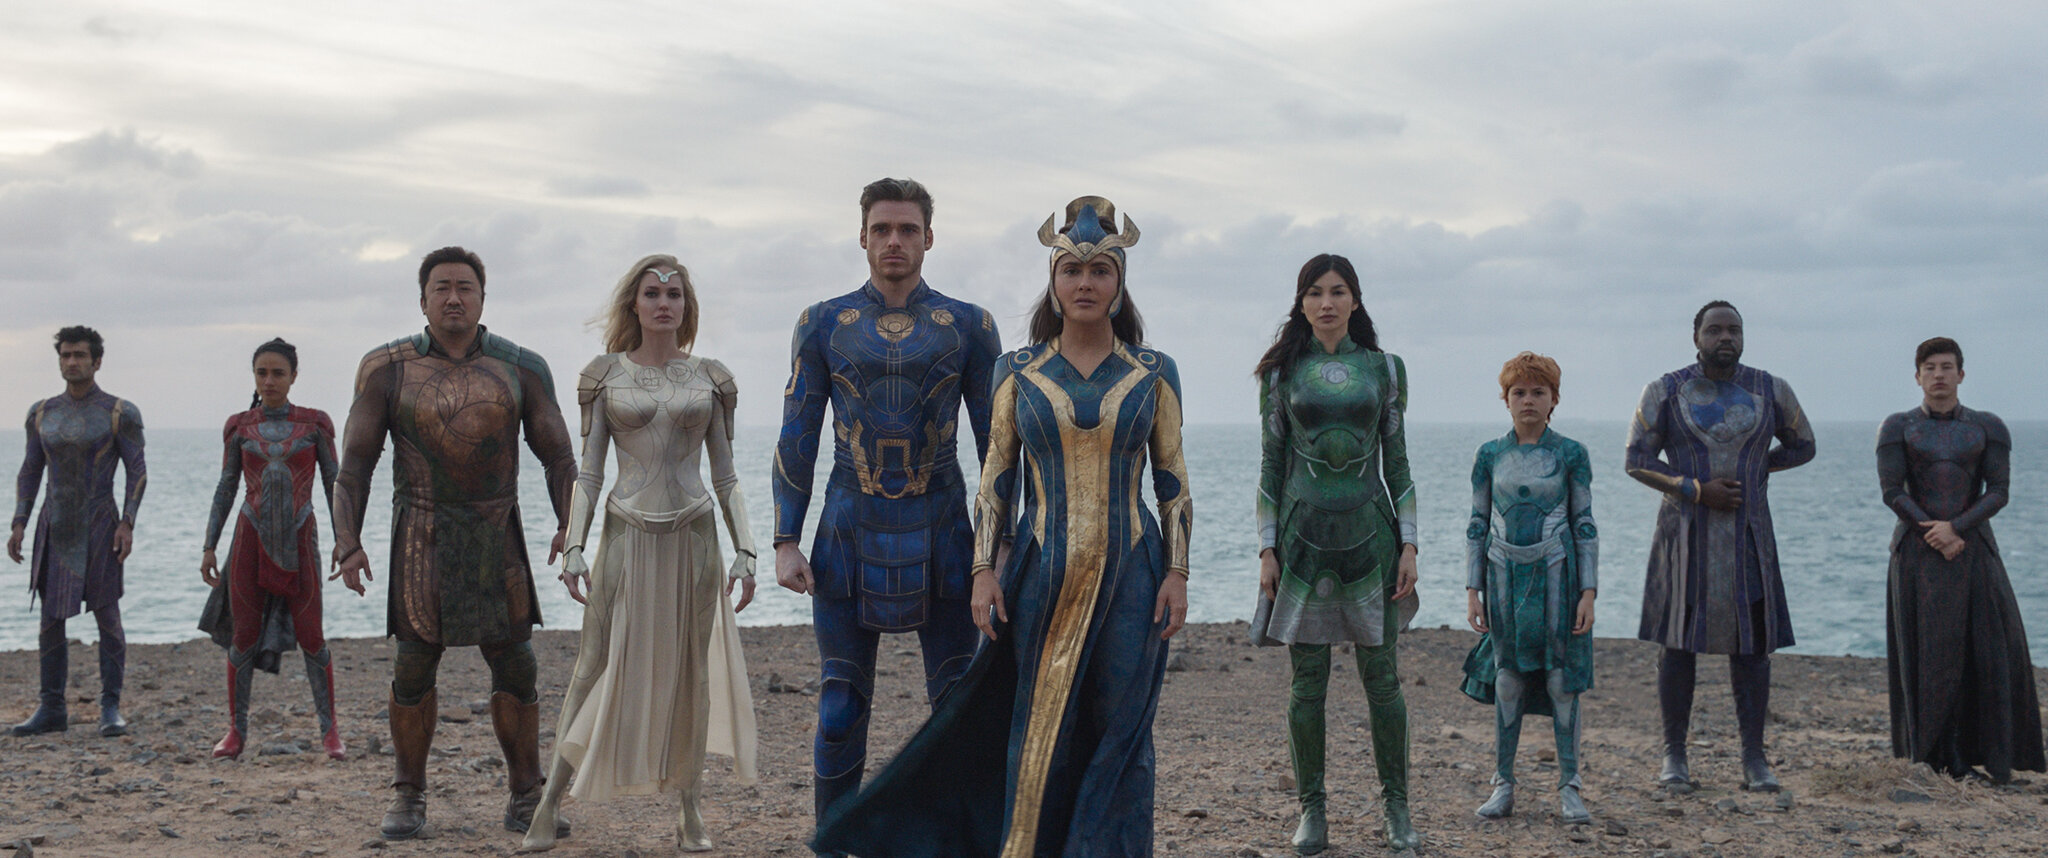 The cast of heroes in Marvel's Eternals standing together on a beach